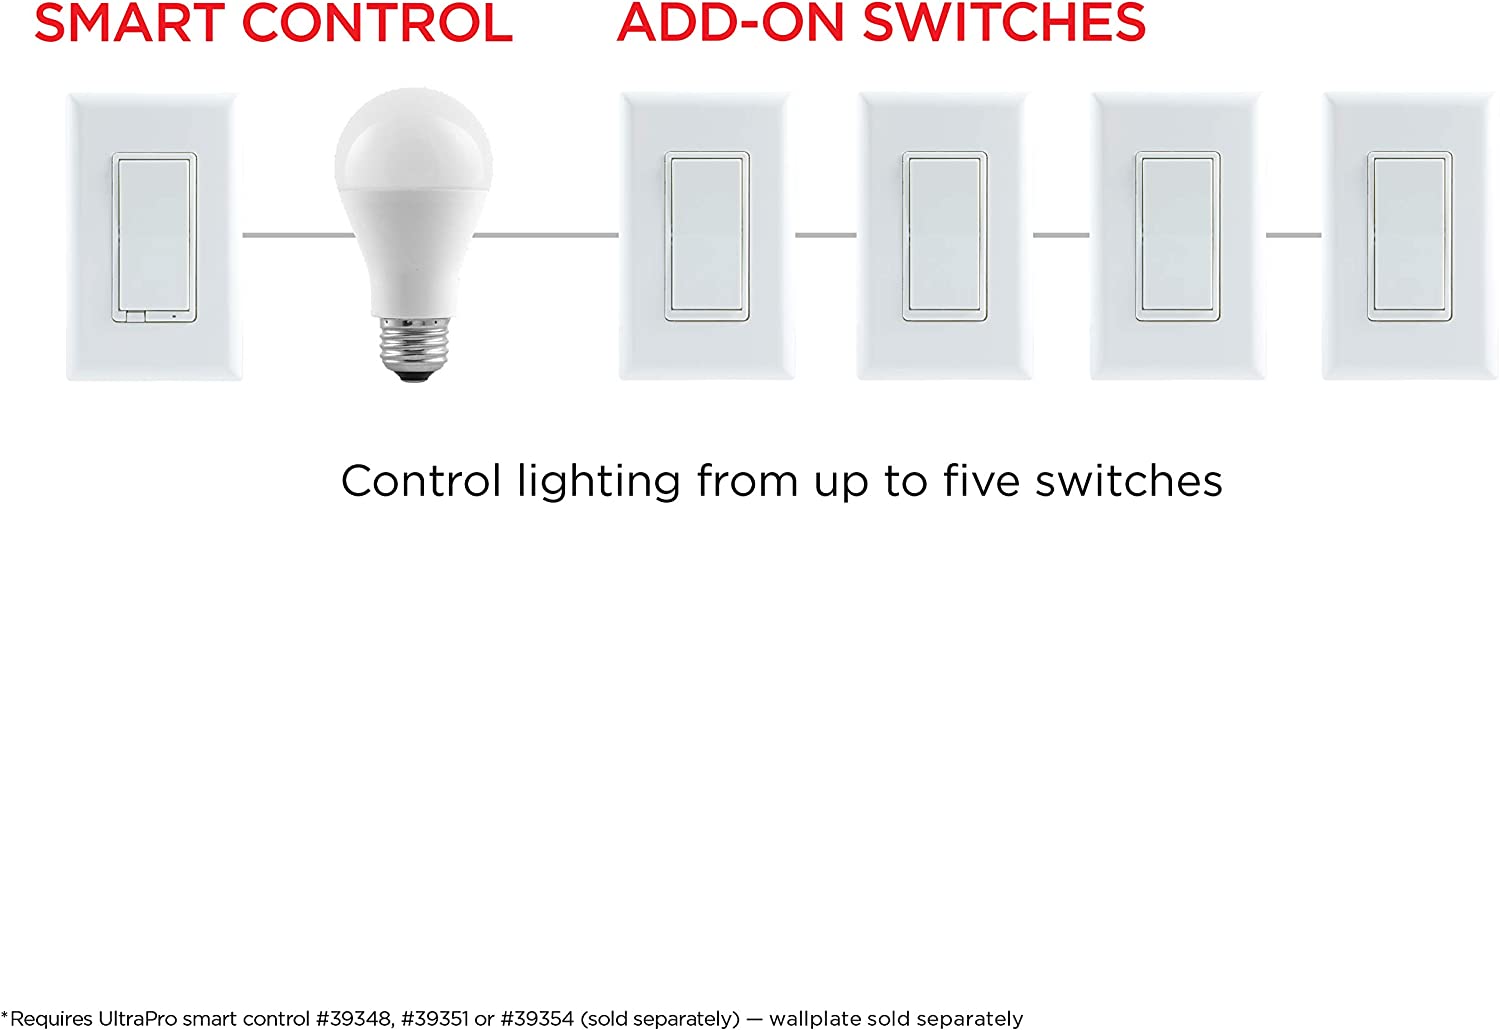 UltraPro Add-On Switch QuickFit and SimpleWire, In-Wall White Rocker Paddle Only, Z-Wave ZigBee Wireless Smart Lighting Controls, NOT A STANDALONE Switch, 2 Pack, 54905